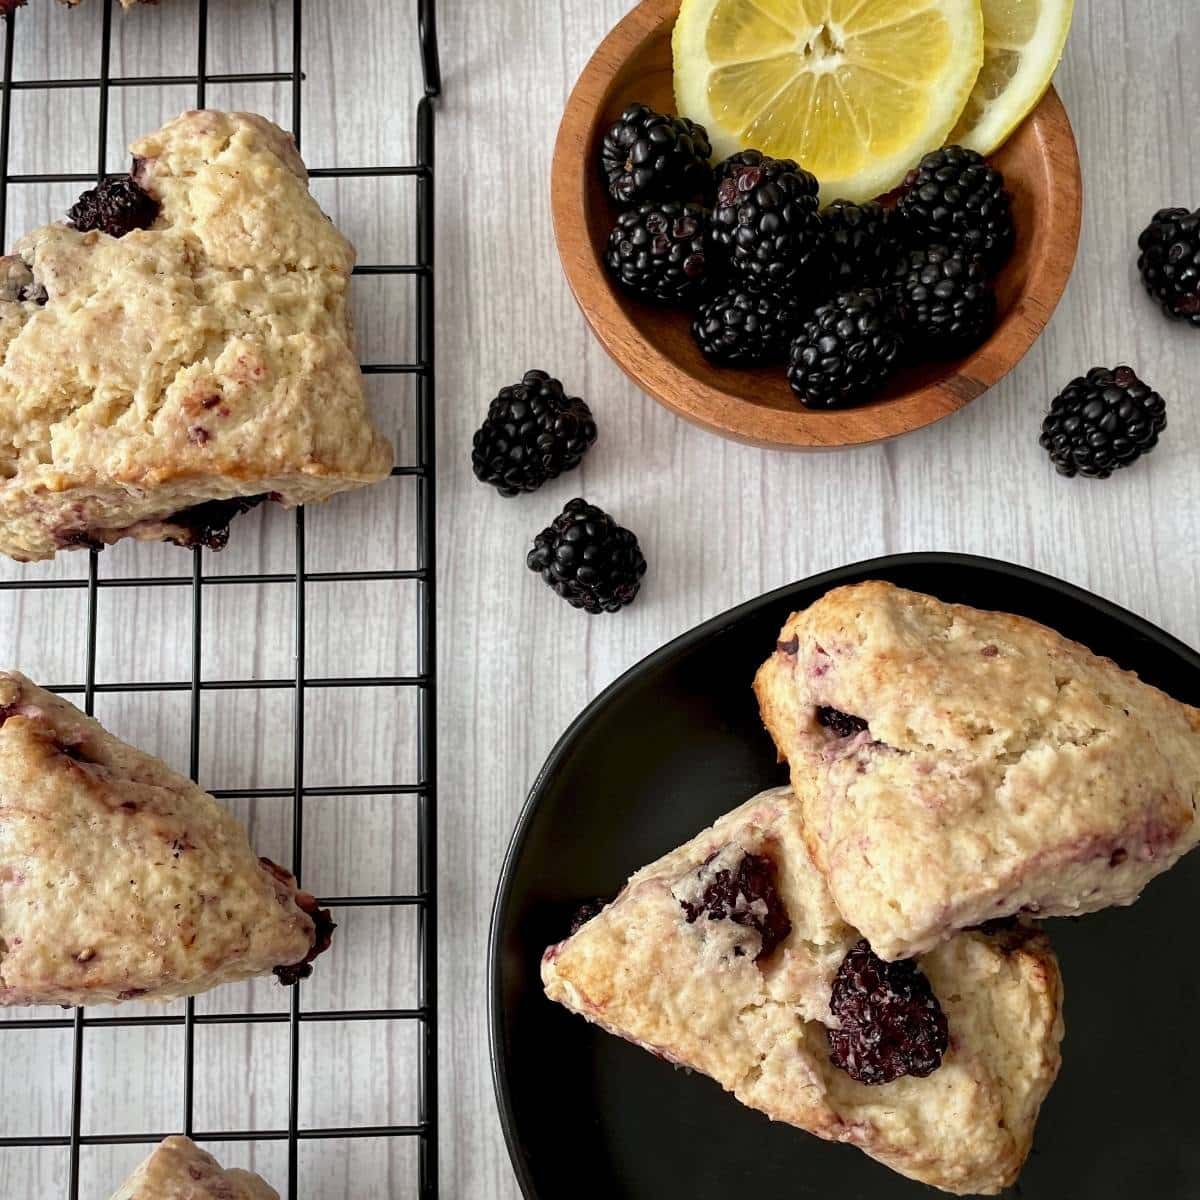 Baked scones on a cooling rack and plate next to fresh lemons and blackberries.